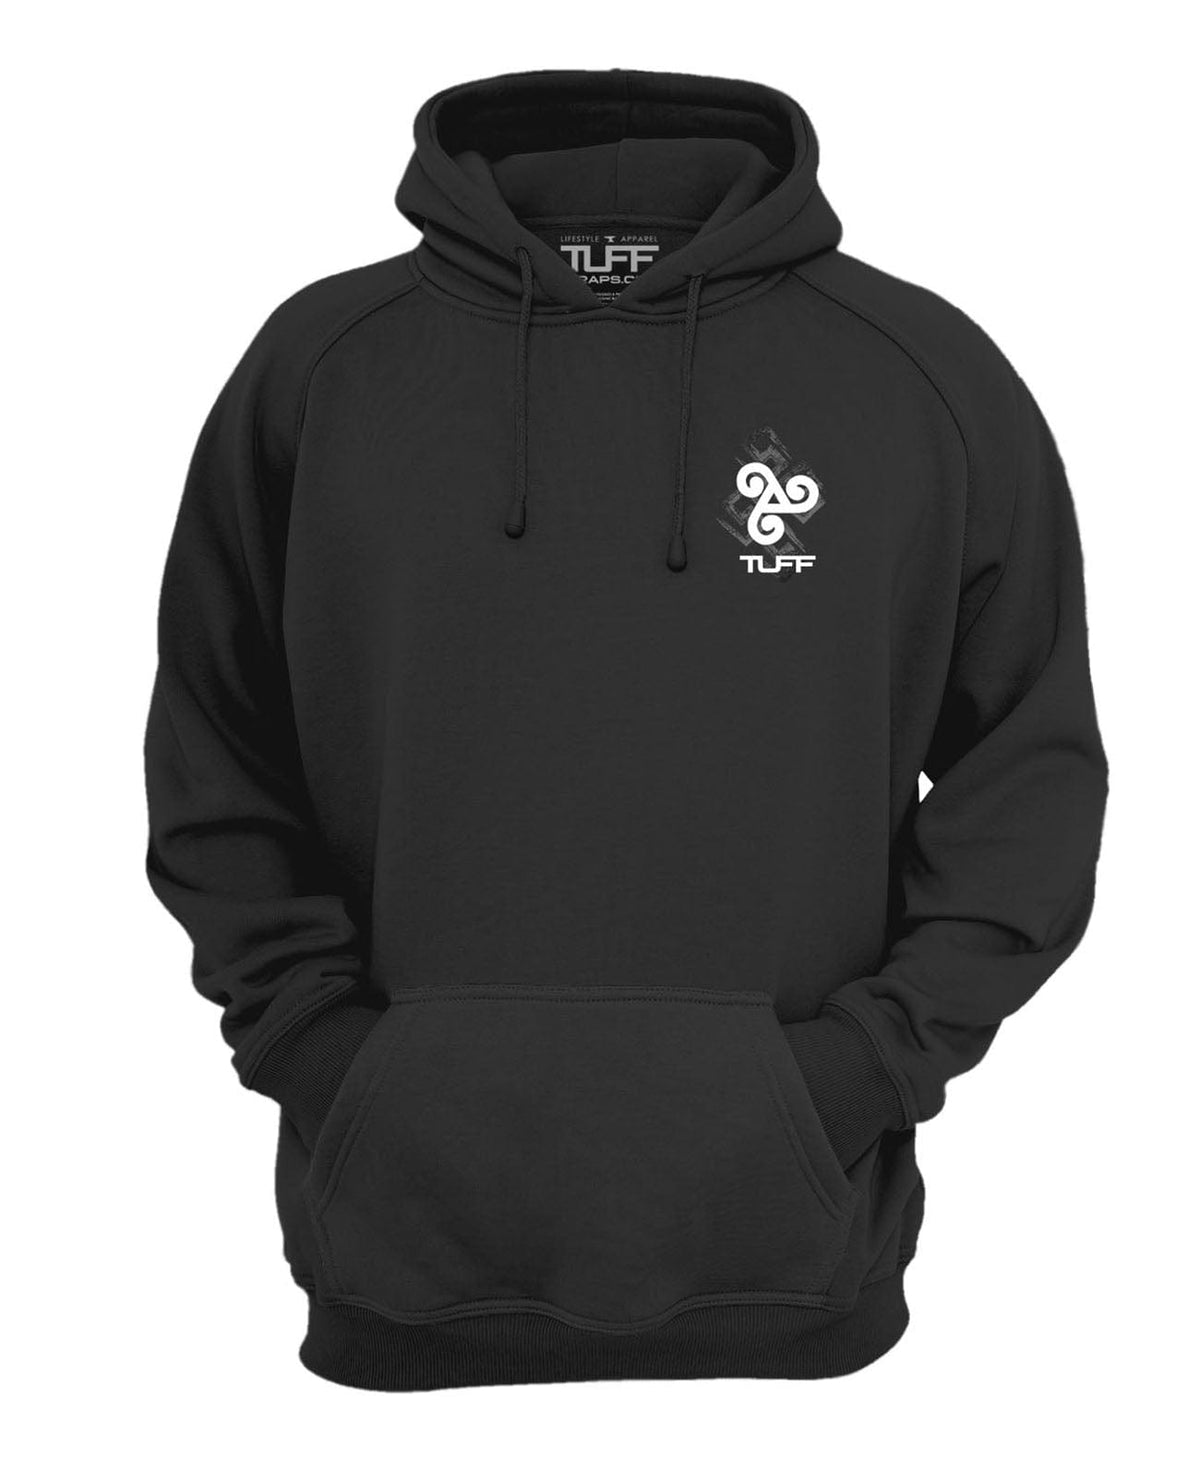 Rage Against the Dying of the Light Hooded Sweatshirt TuffWraps.com